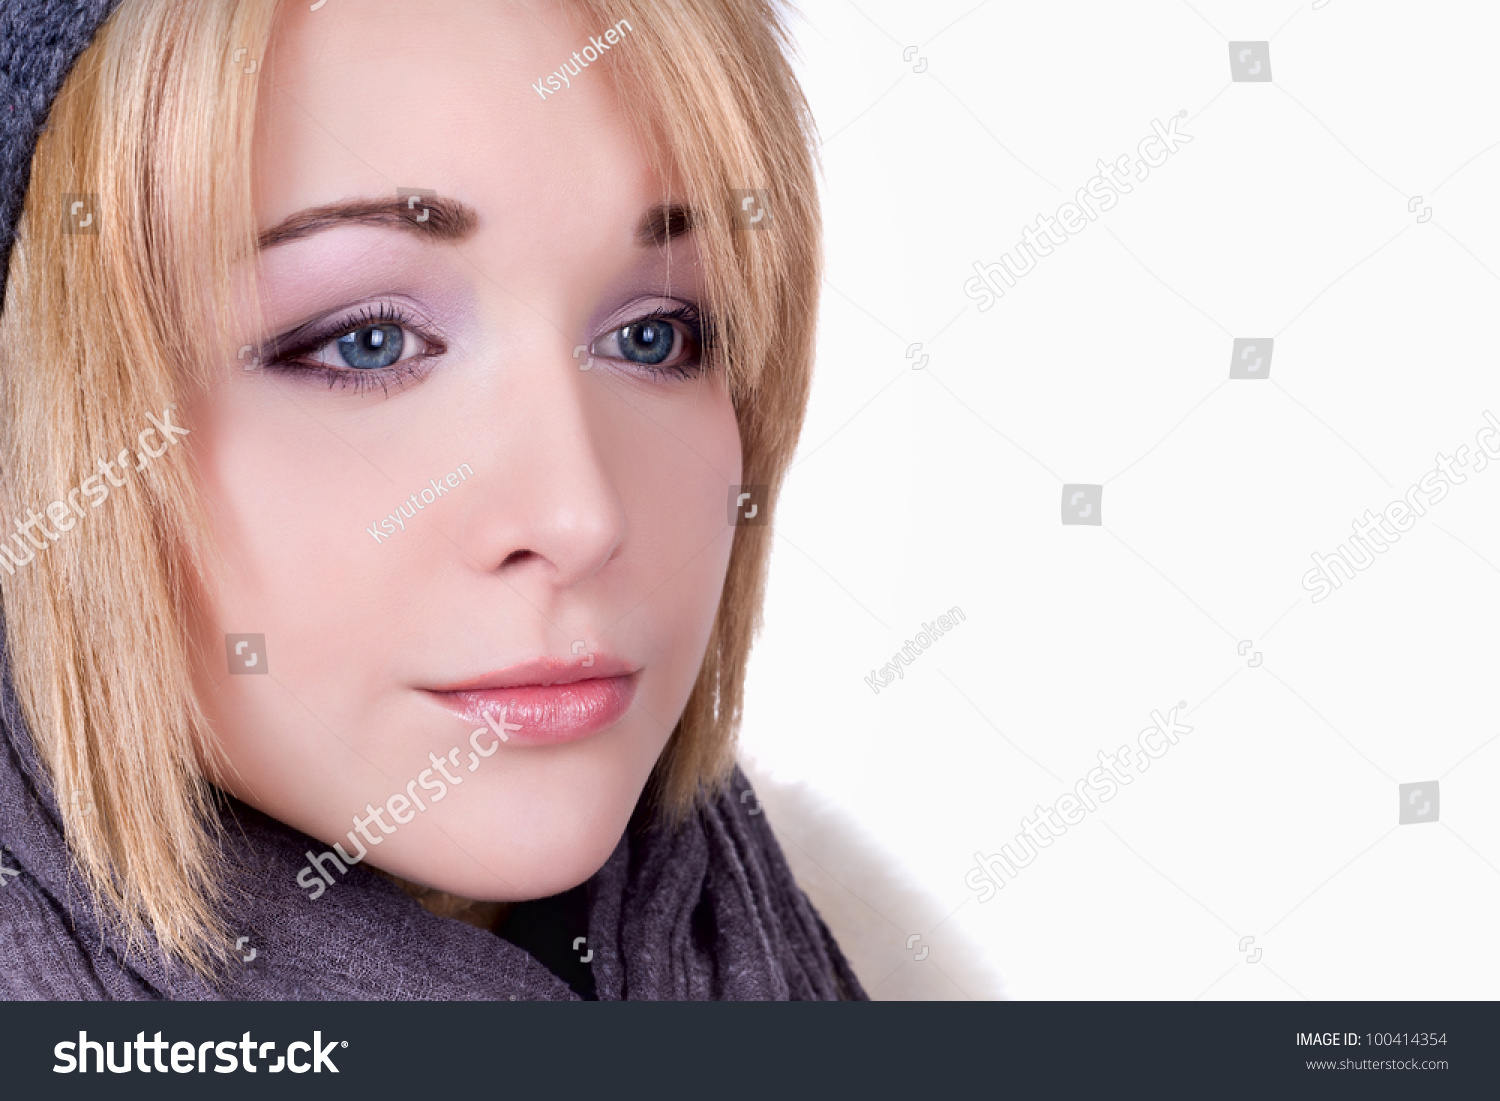 Young girl with blonde hair smiling - wide 7